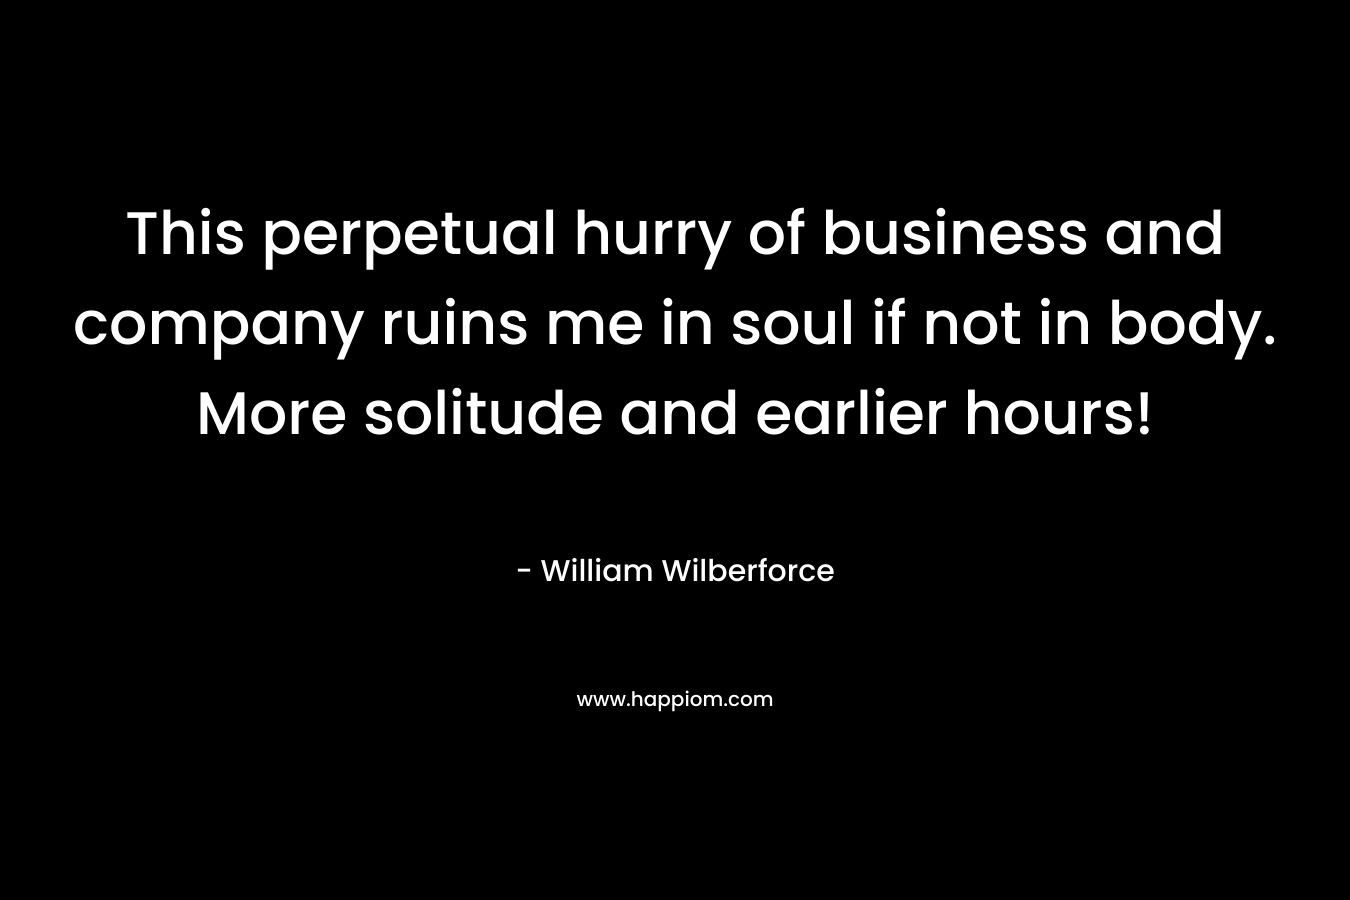 This perpetual hurry of business and company ruins me in soul if not in body. More solitude and earlier hours!